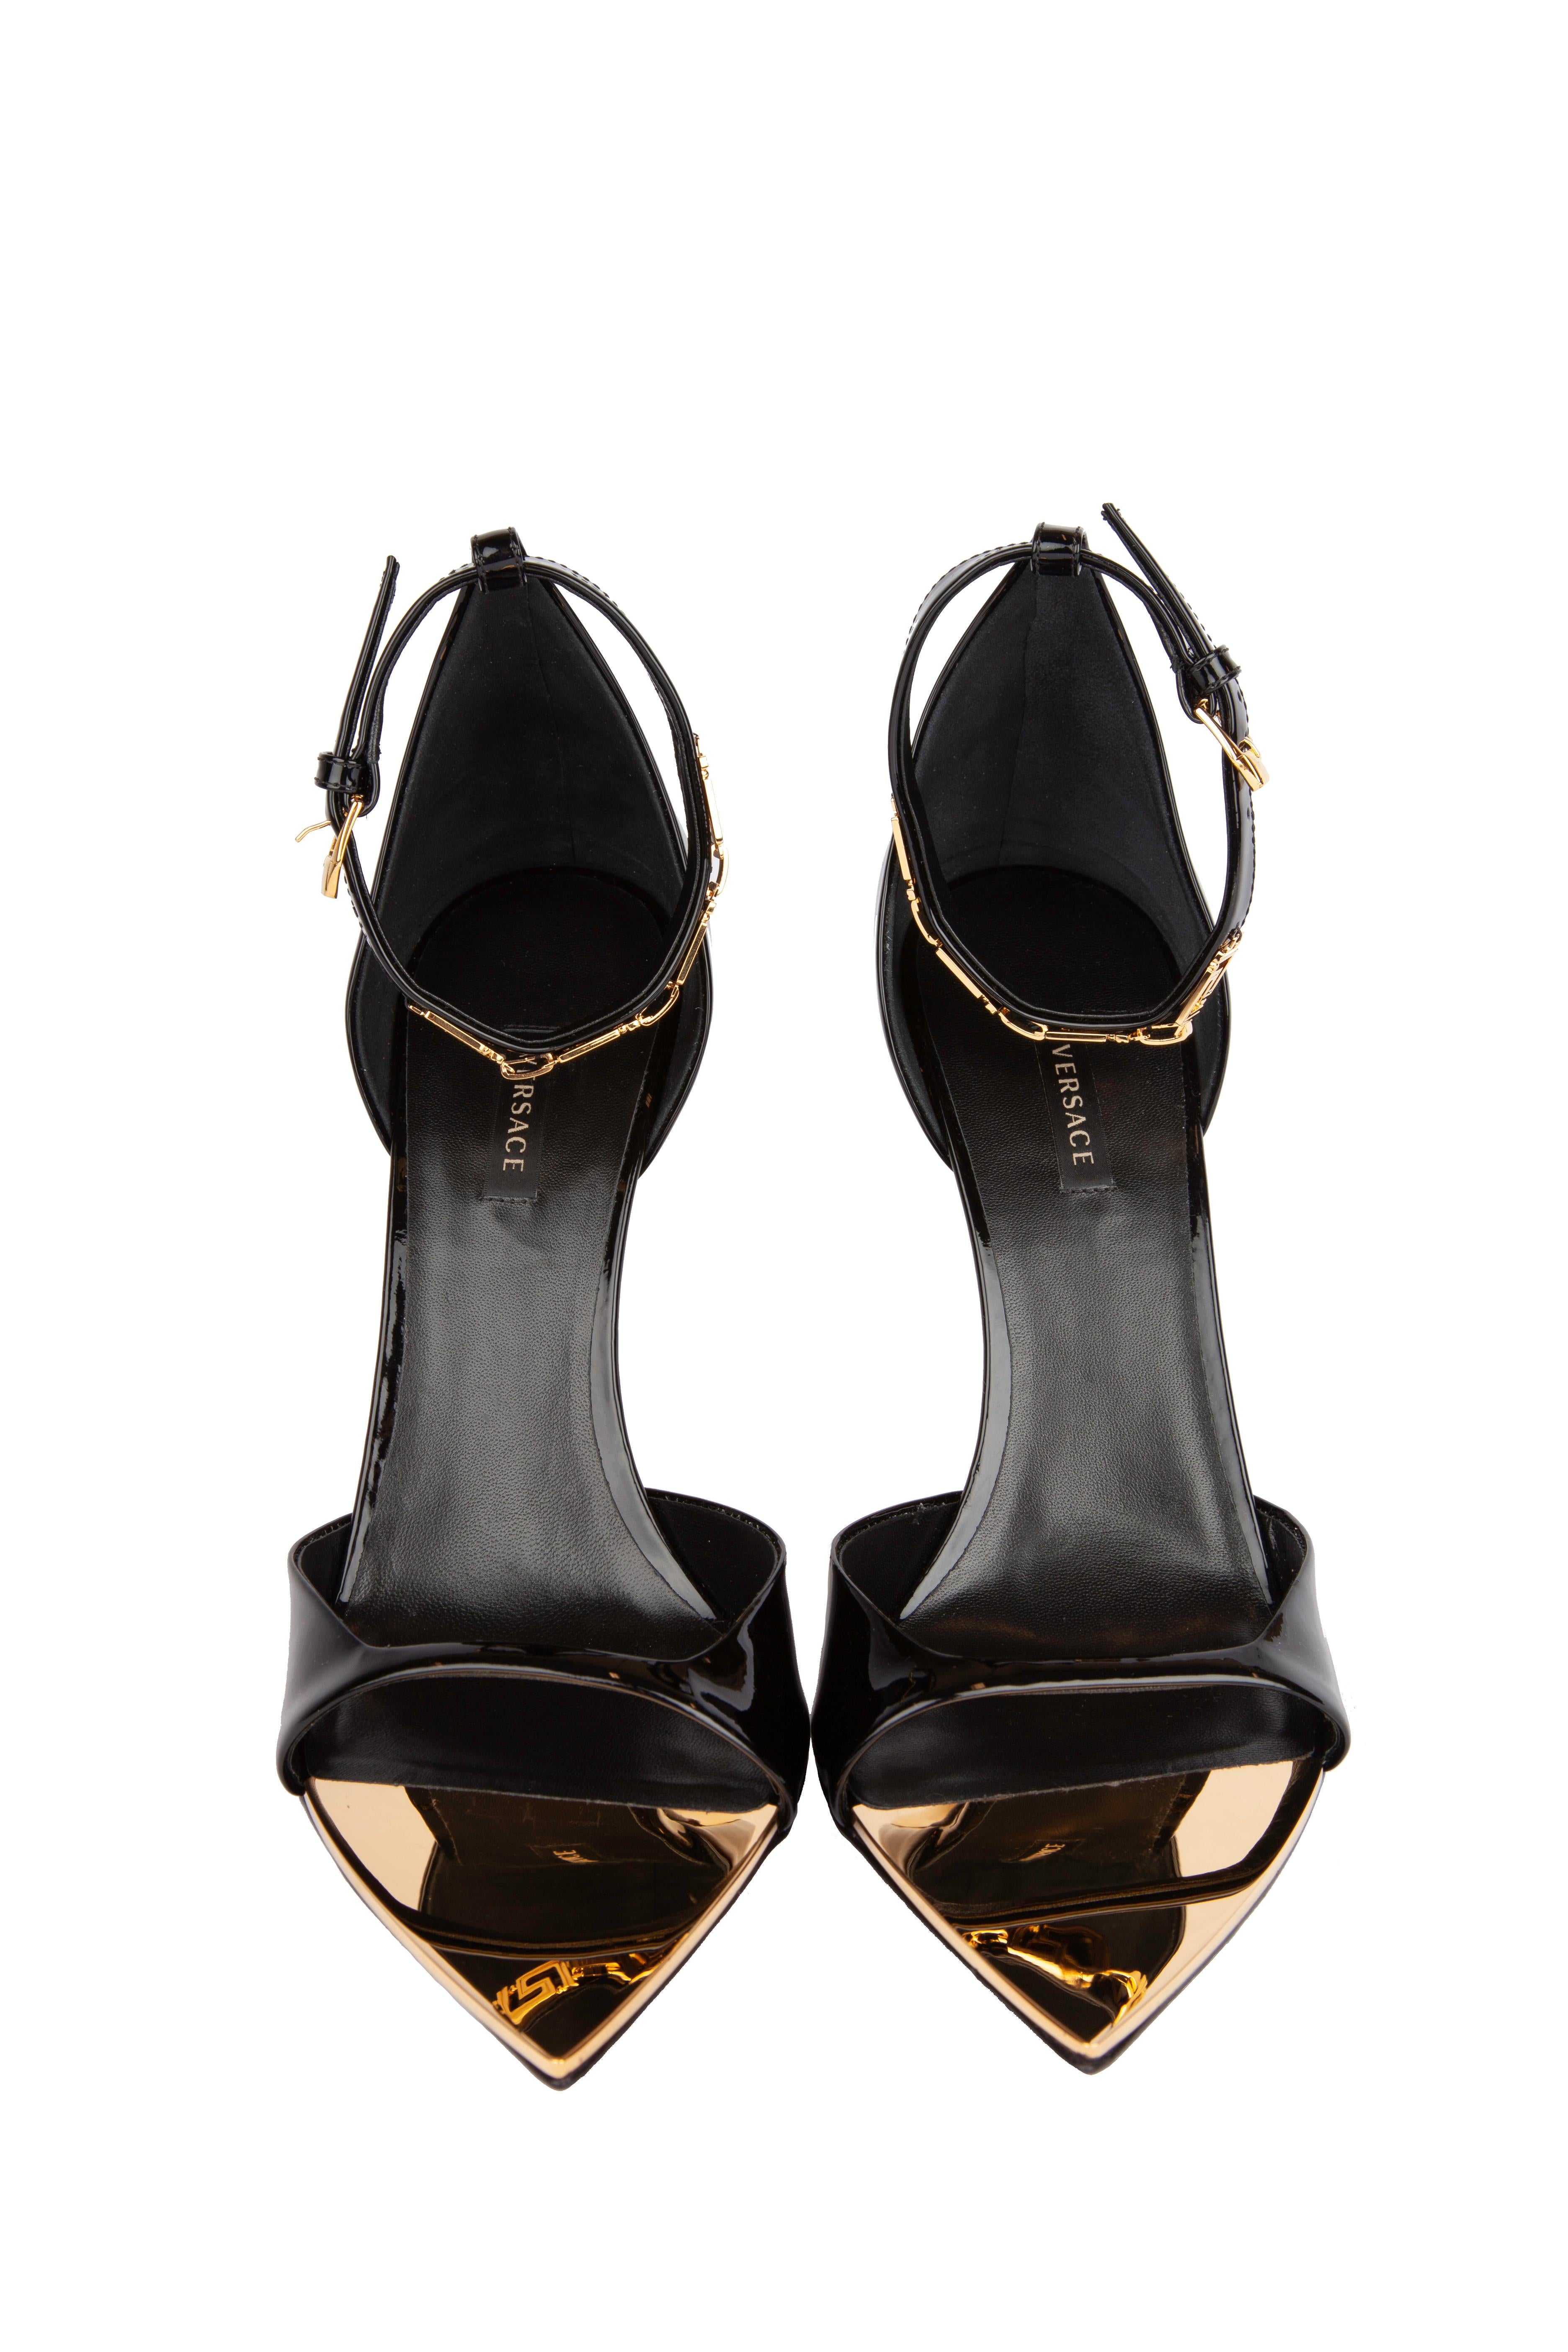 Versace Black Patent Leather Irina Strap Heels with Gold Tone Hardware Size 41 In New Condition In Paradise Island, BS